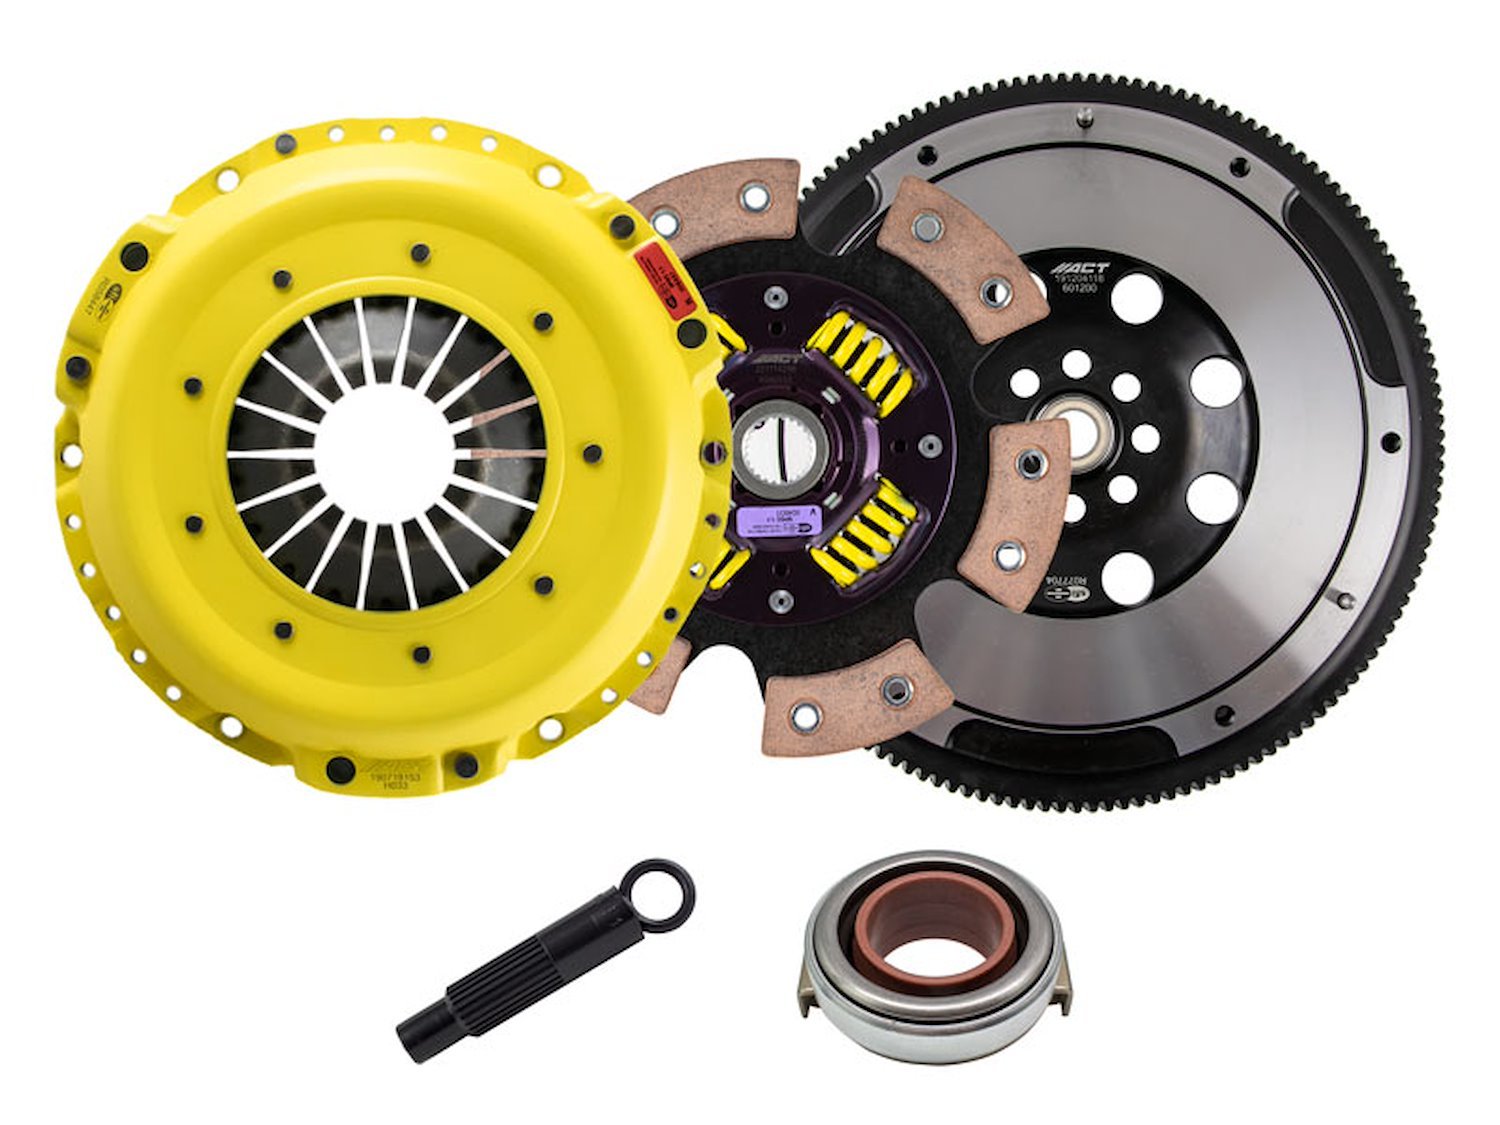 HD/Race Sprung 6-Pad Transmission Clutch Kit Fits Select Acura/Honda